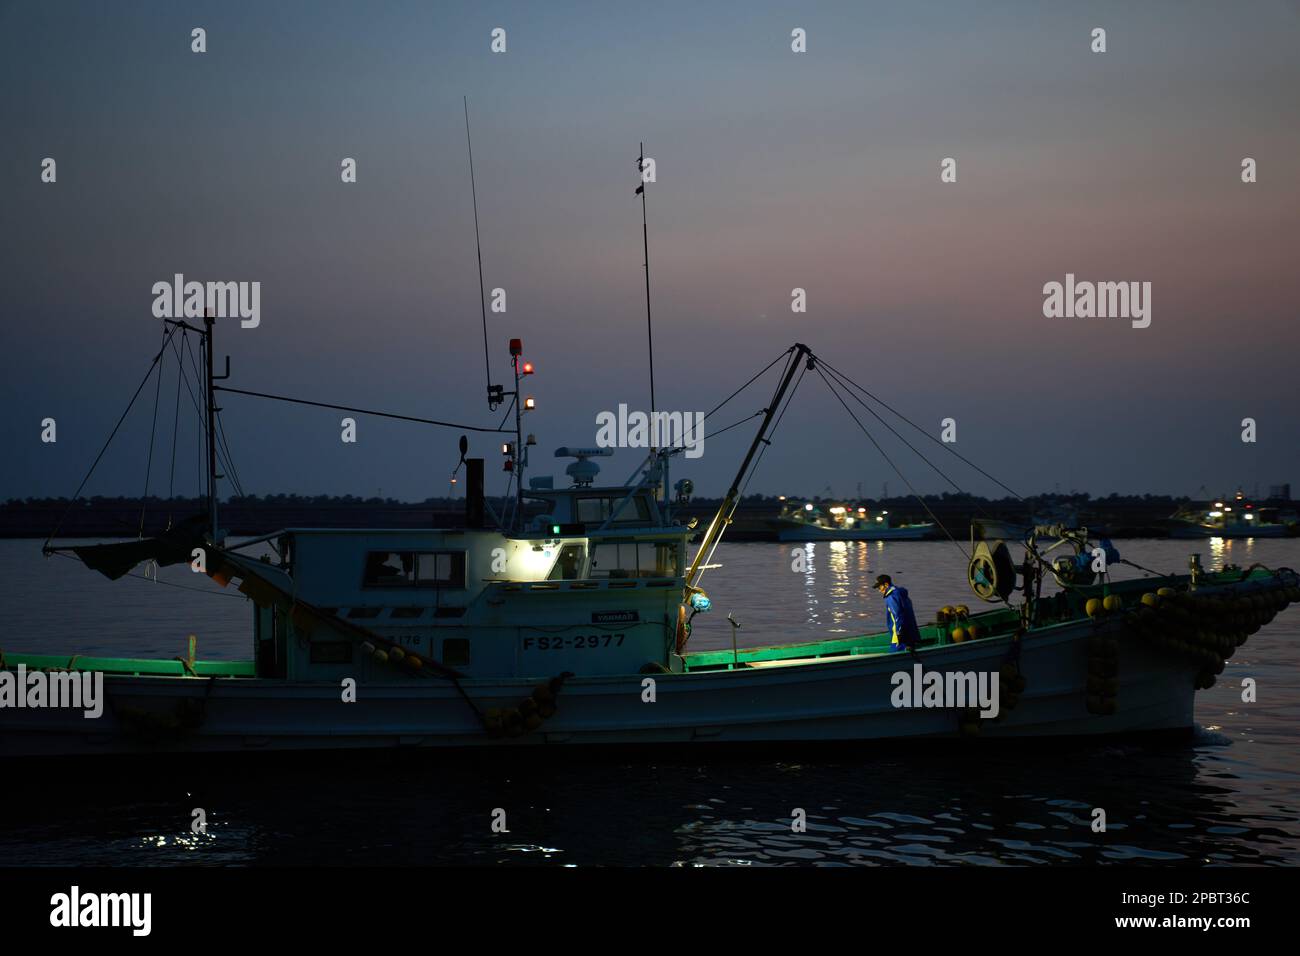 (230313) -- FUKUSHIMA, March 13, 2023 (Xinhua) -- Fishing boats are pictured approaching the shore in Soma City, Fukushima Prefecture, Japan, March 8, 2023. Struck by a magnitude-9.0 earthquake and ensuing tsunami that hit Japan's northeast on March 11, 2011, the power plant suffered core meltdowns, resulting in a level-7 nuclear accident, the highest on the International Nuclear and Radiological Event Scale. Twelve years after the 2011 accident traumatized Fukushima's fishing industry, local fishermen are still struggling for recovery. As Japan pushes ahead with dumping tons of contaminate Stock Photo